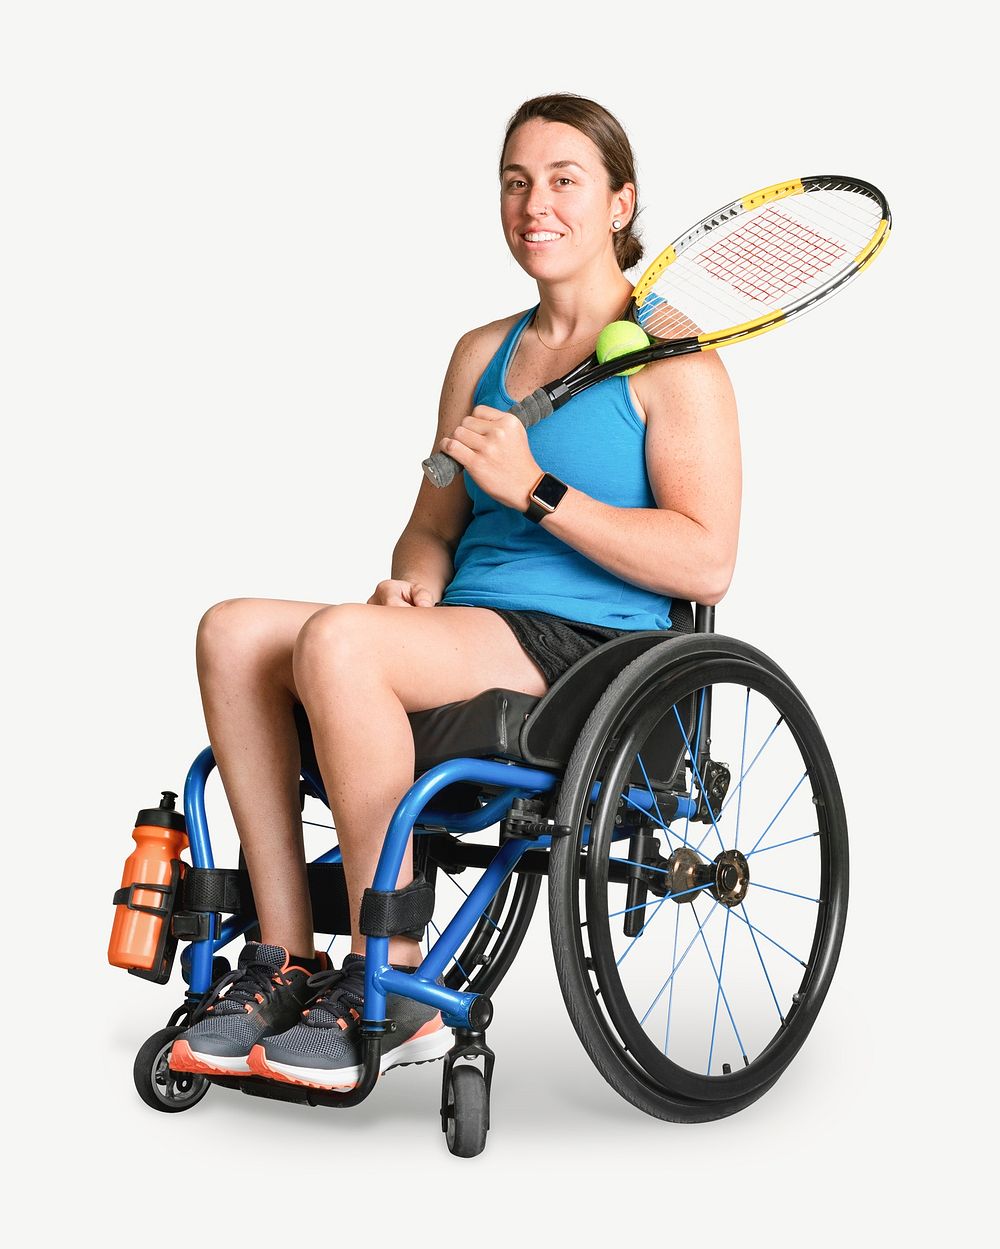 Female athlete in wheelchair holding tennis racket collage element psd